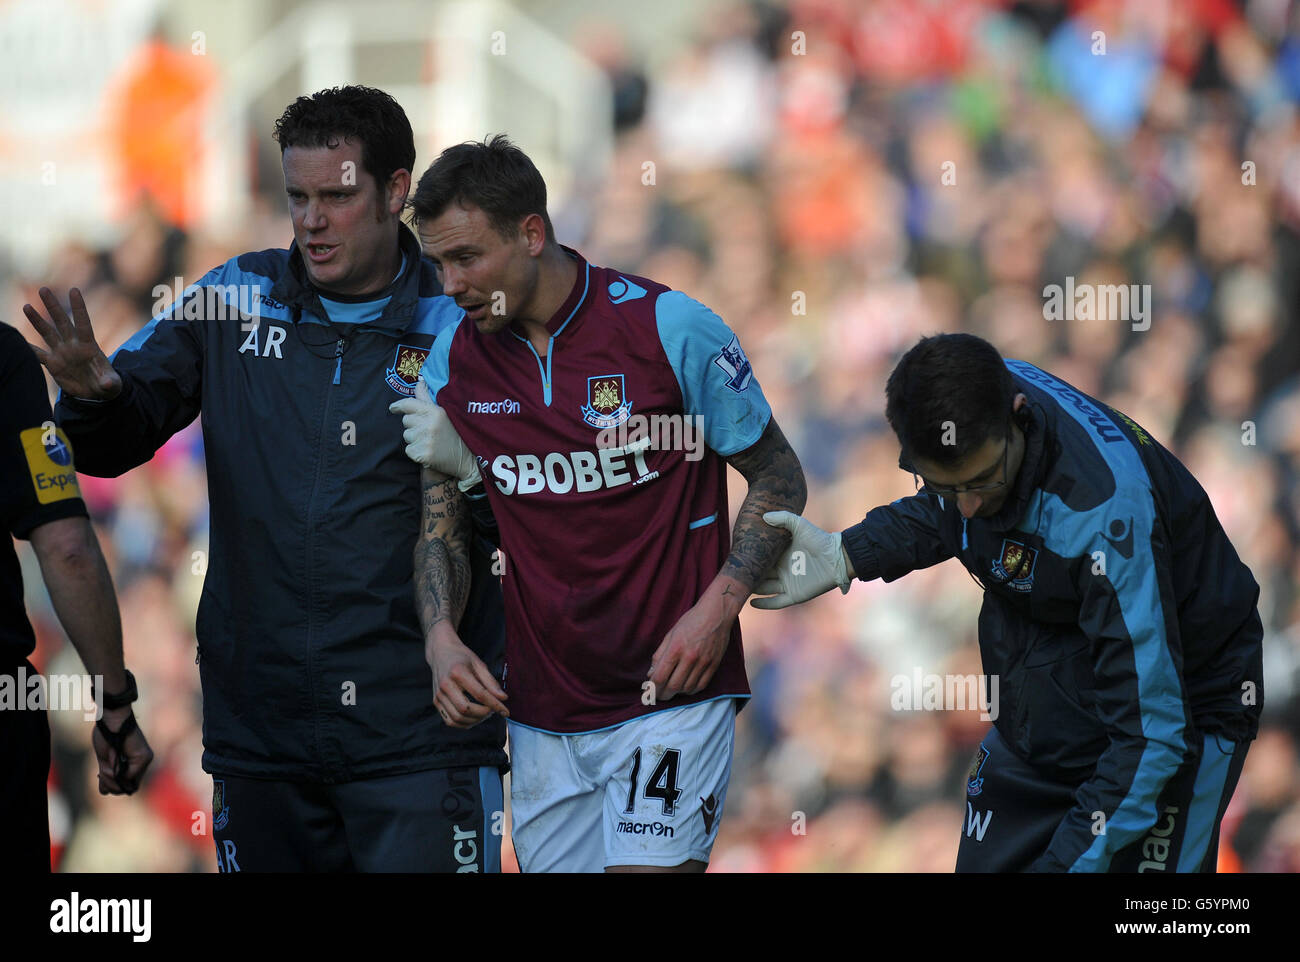 West Ham United's Matthew Taylor is helped off after a clash with Stoke City's Peter Crouch during the Barclays Premier League match at the Britannia Stadium, Stoke. Stock Photo